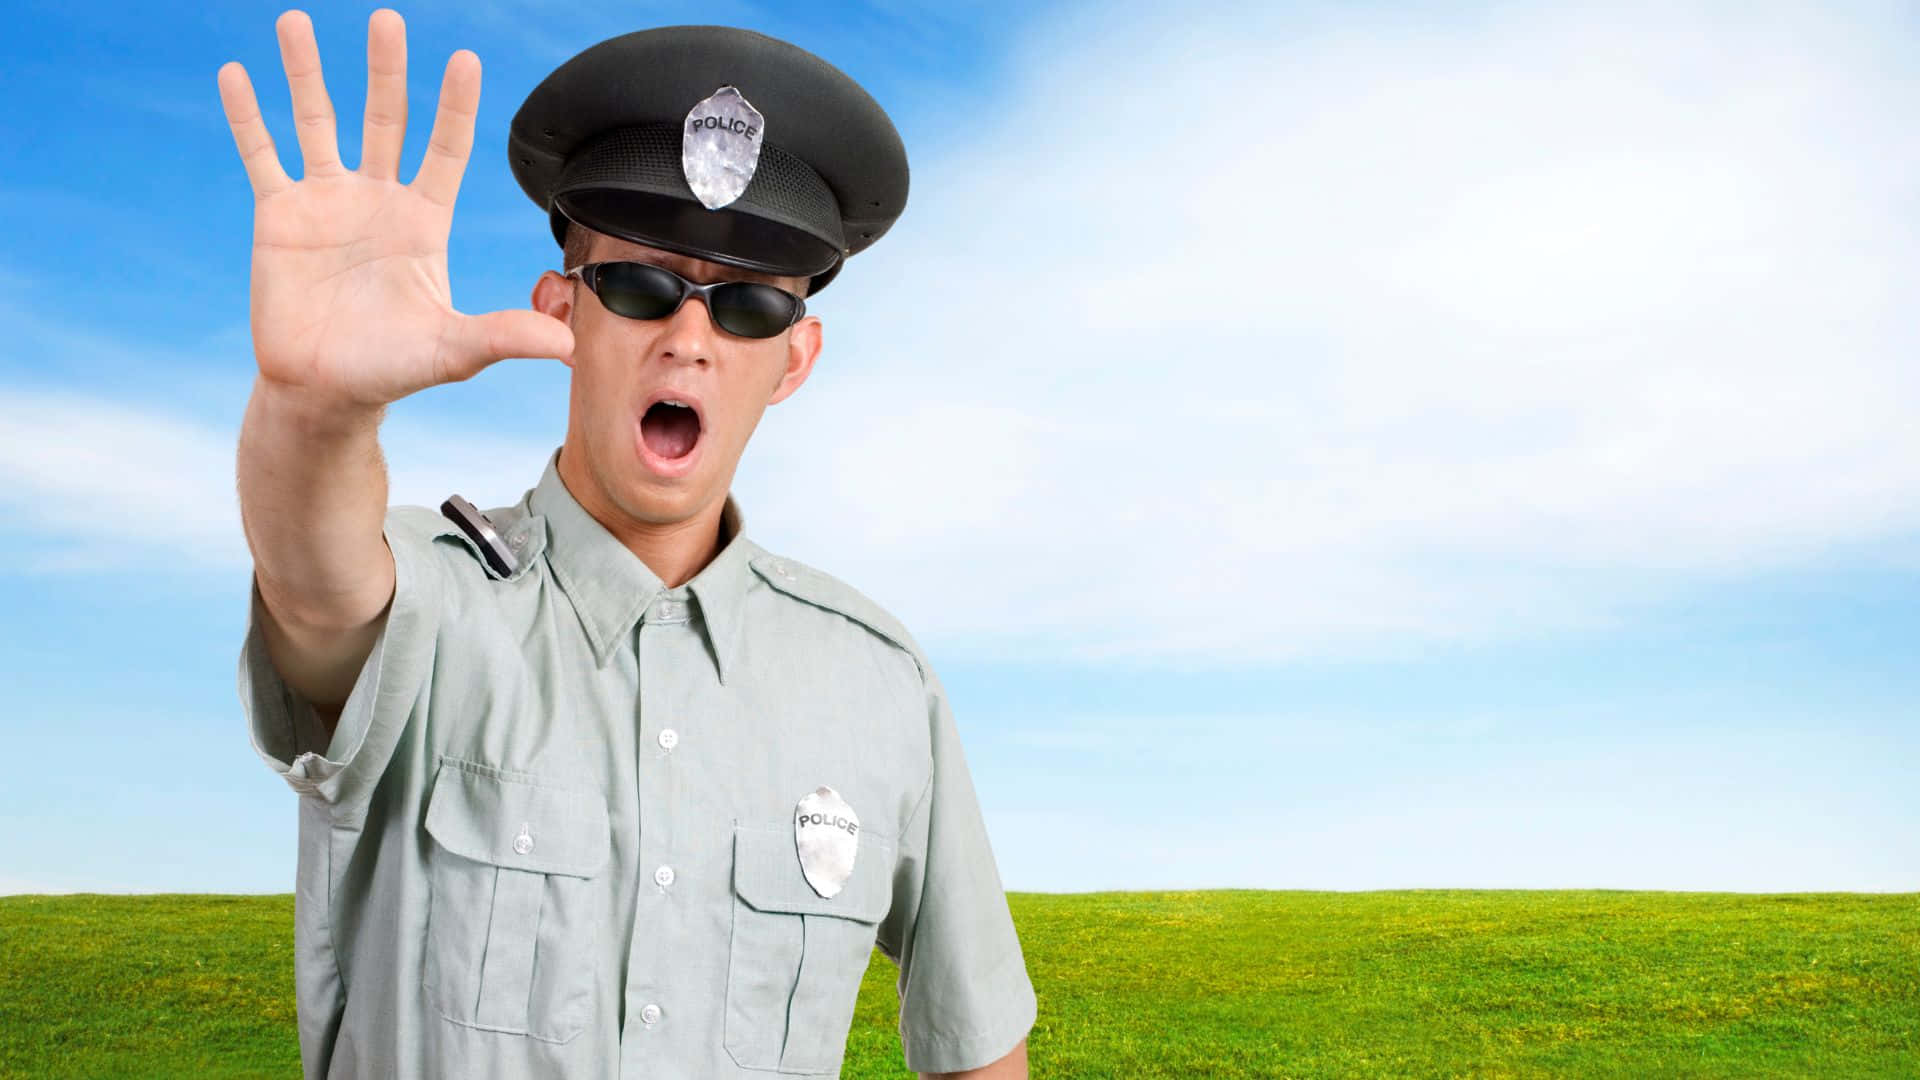 Cop Police Officer With Stop Hand Gesture Background